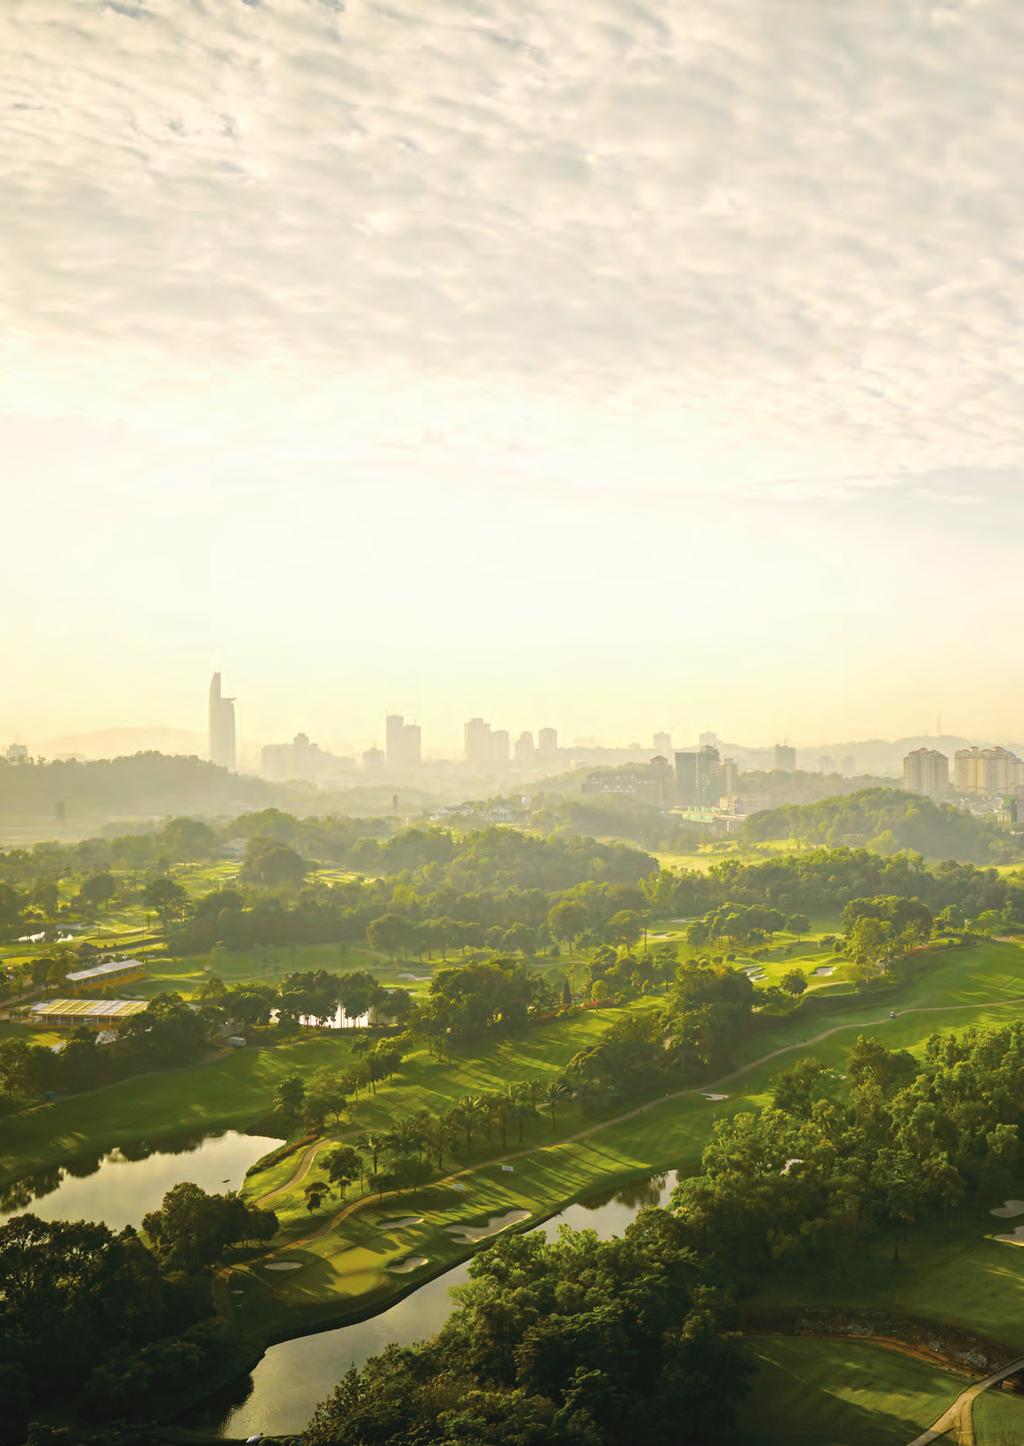 east residence a 360-acre integrated international lifestyle community Alya Kuala Lumpur is adjacent to the leafy surrounds of the Bukit Kiara forest reserve, where the 245-acre Bukit Kiara public